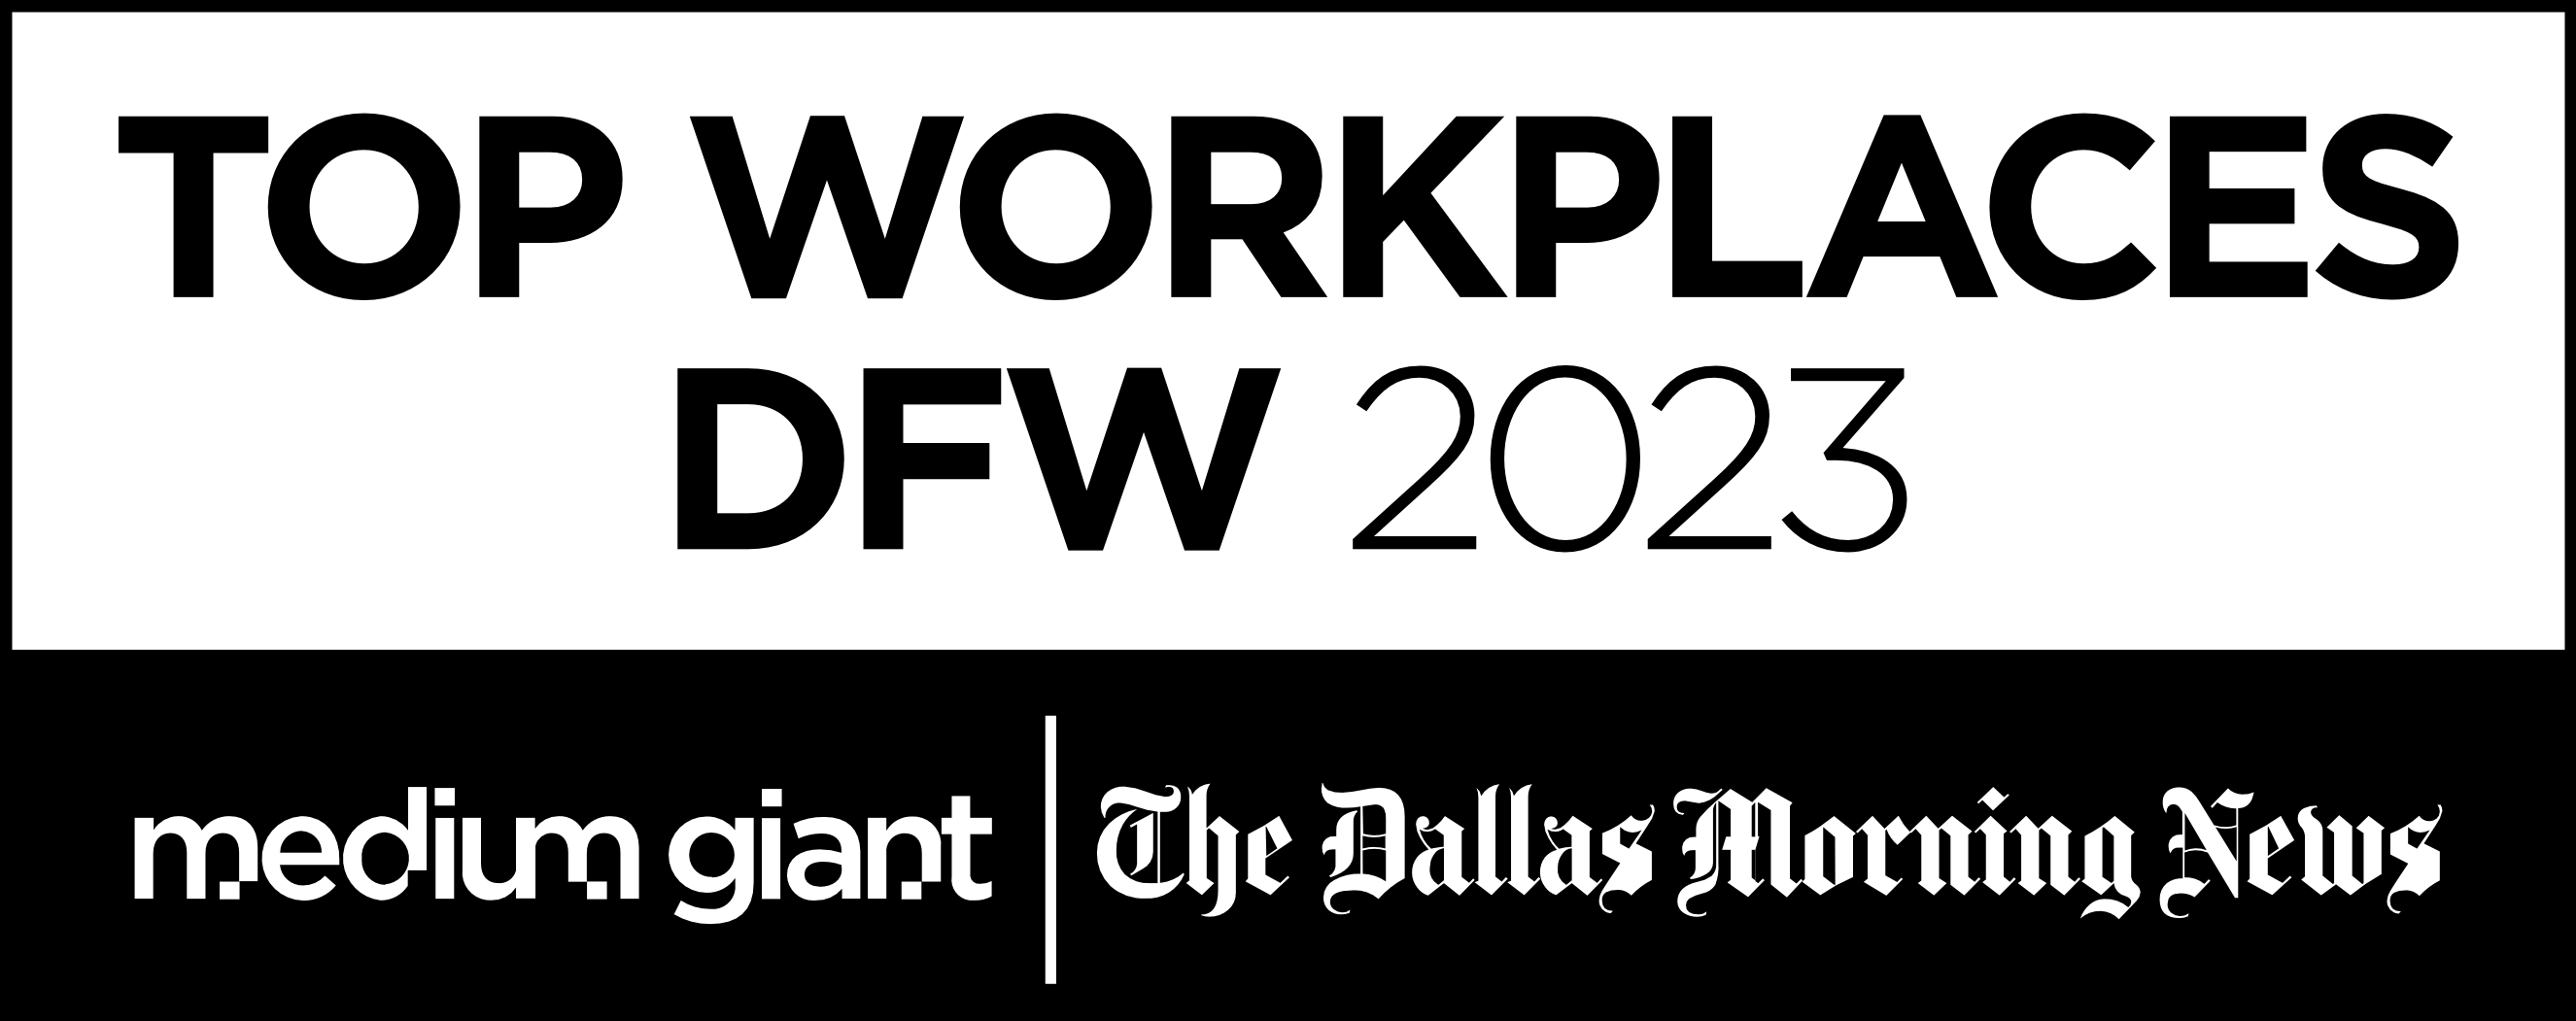 Top Workplaces in DFW